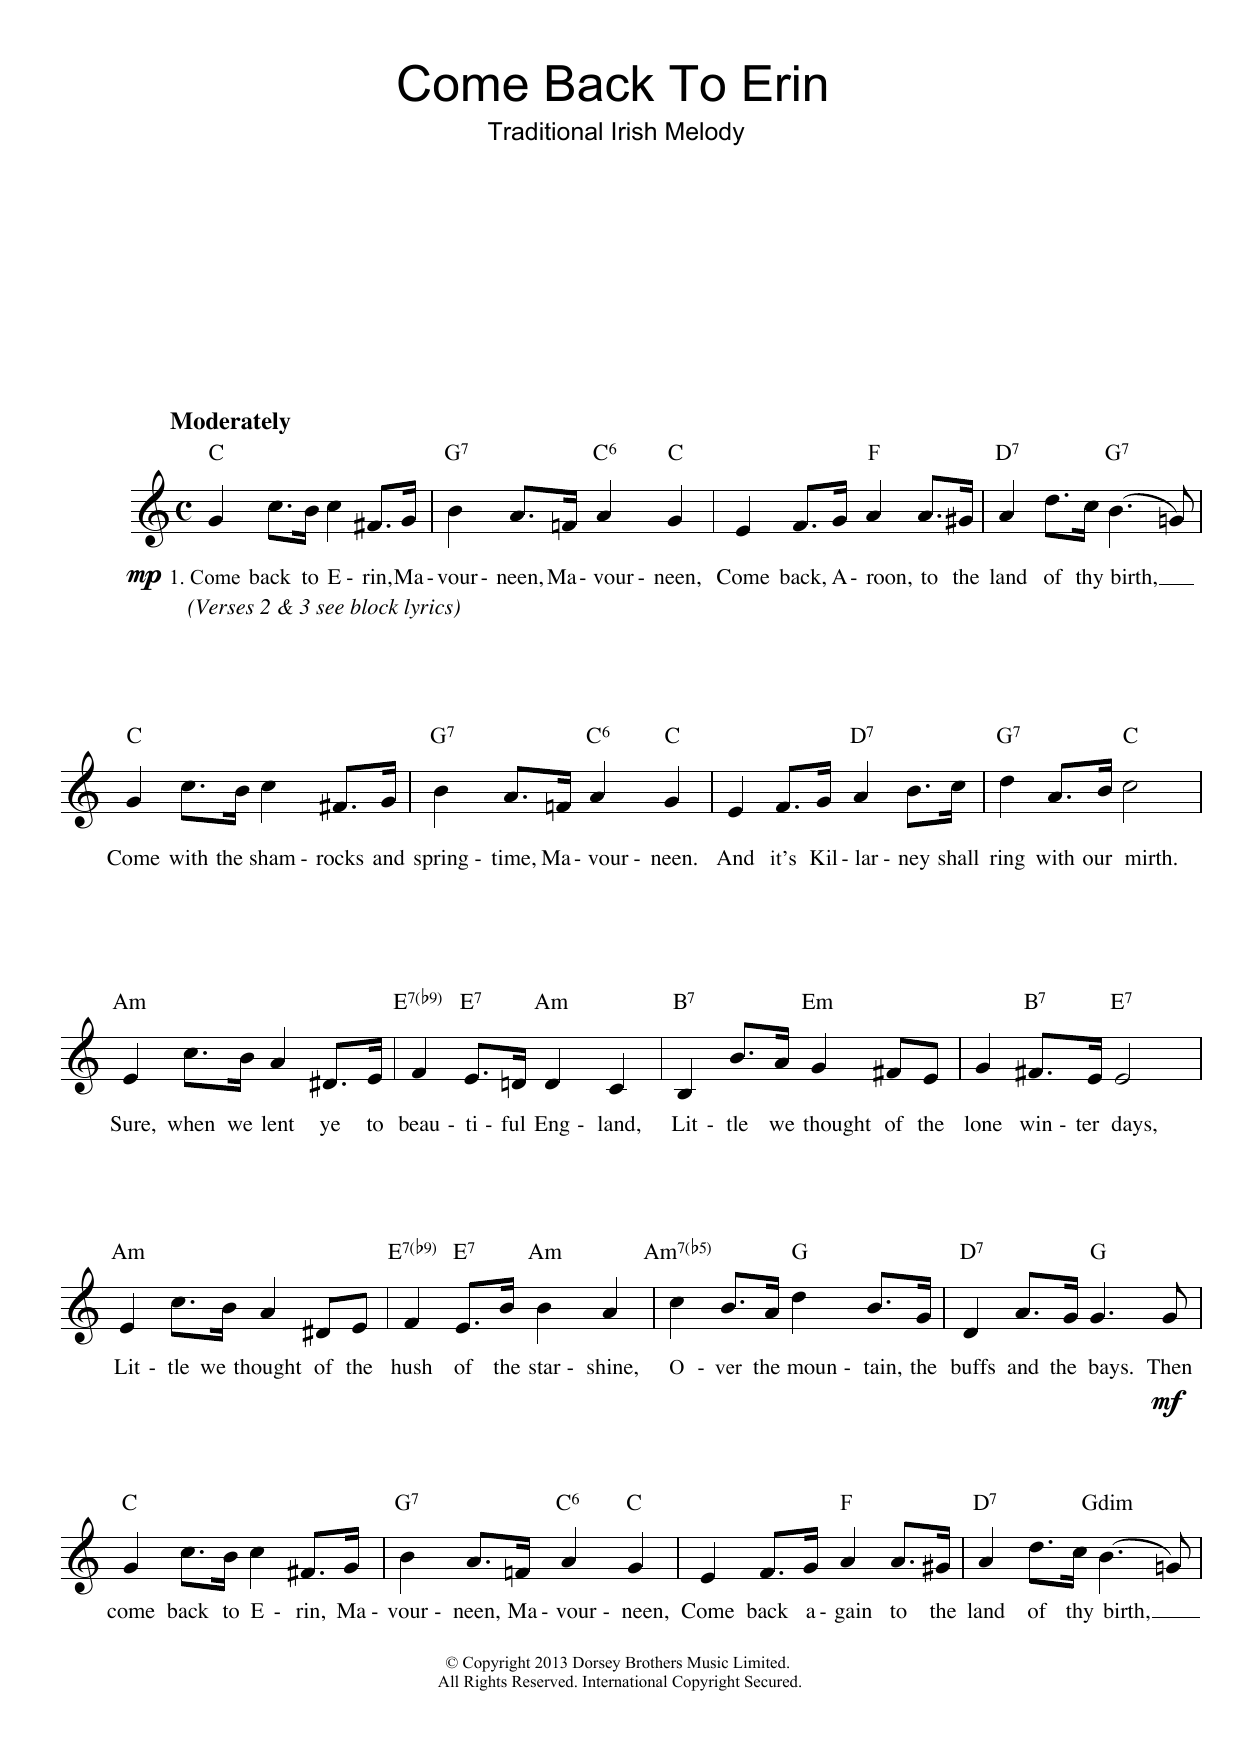 Irish Folksong Come Back To Erin sheet music notes and chords. Download Printable PDF.